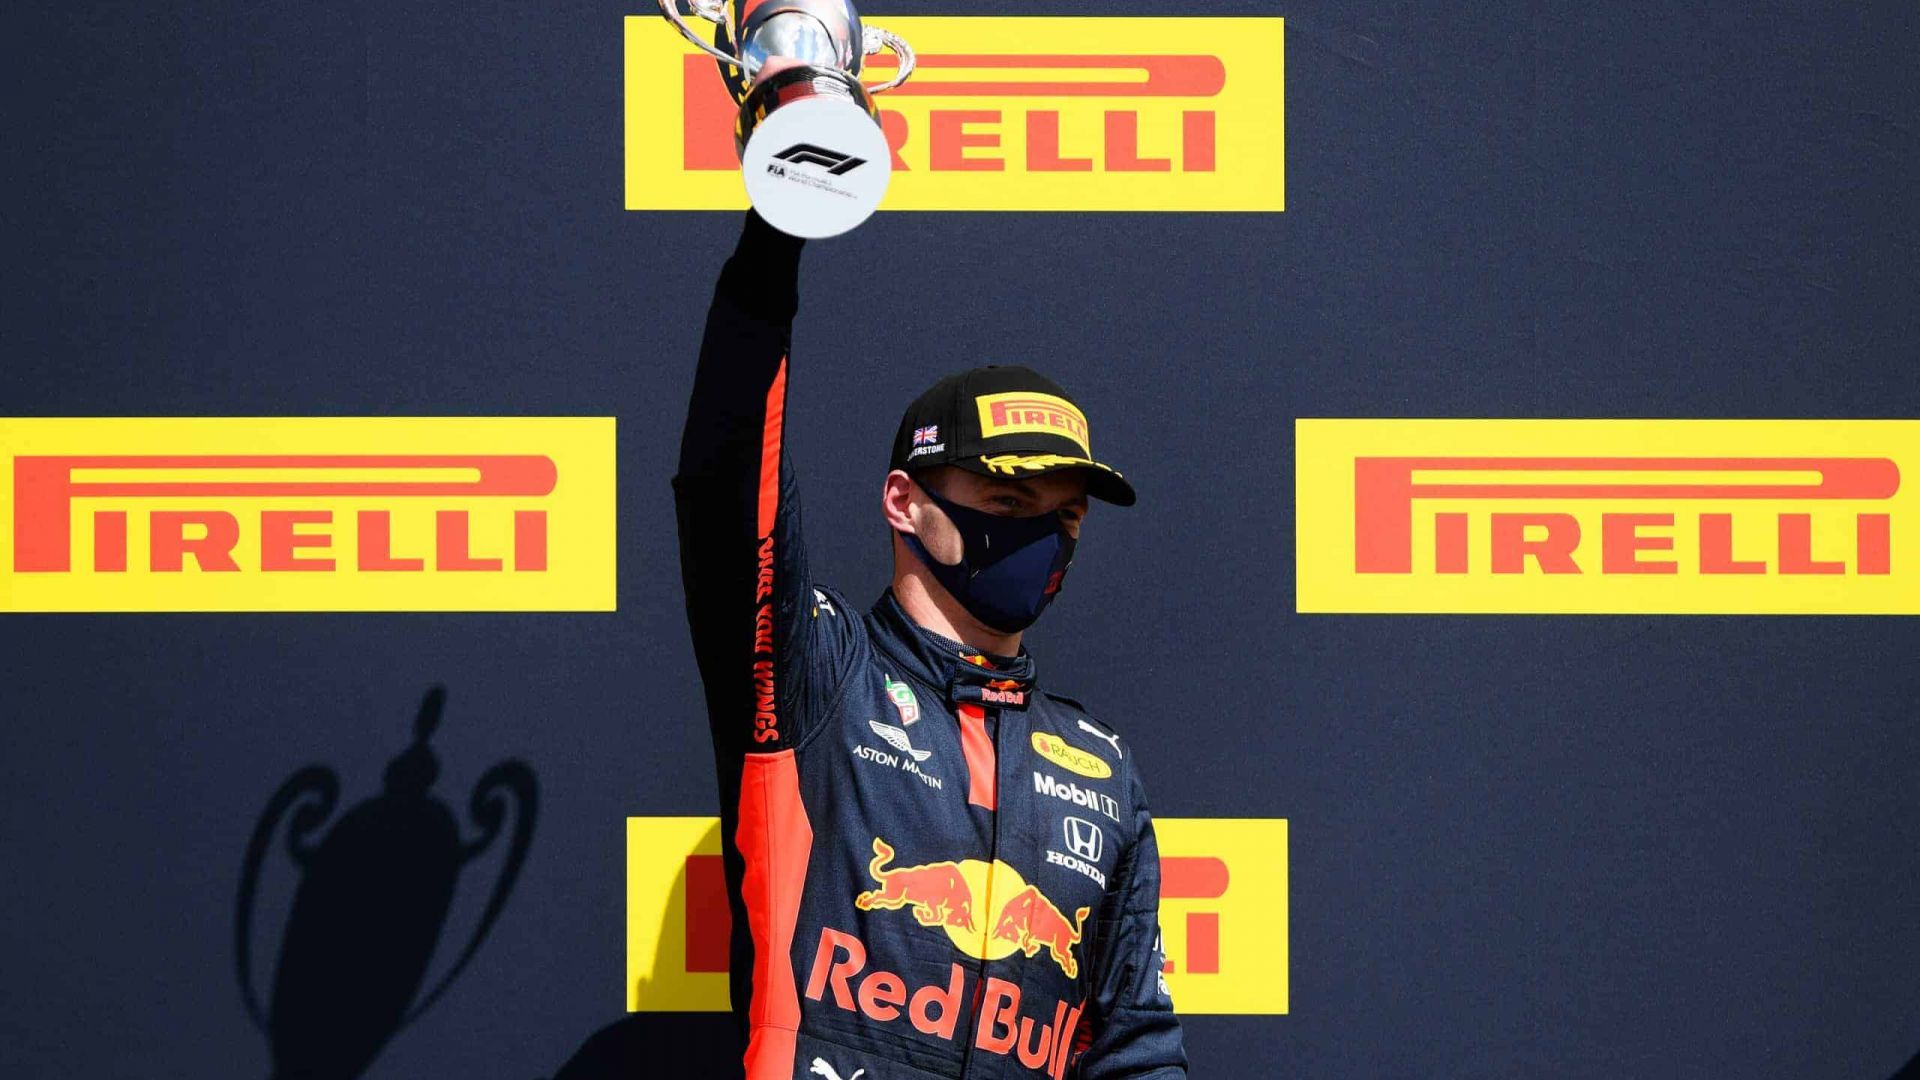 NORTHAMPTON, ENGLAND - AUGUST 02: Runner-up Max Verstappen of Netherlands and Red Bull Racing celebrates on the podium during the F1 Grand Prix of Great Britain at Silverstone on August 02, 2020 in Northampton, England. (Photo by Rudy Carezzevoli/Getty Images) // Getty Images / Red Bull Content Pool  // AP-24TQSN2T92111 // Usage for editorial use only //